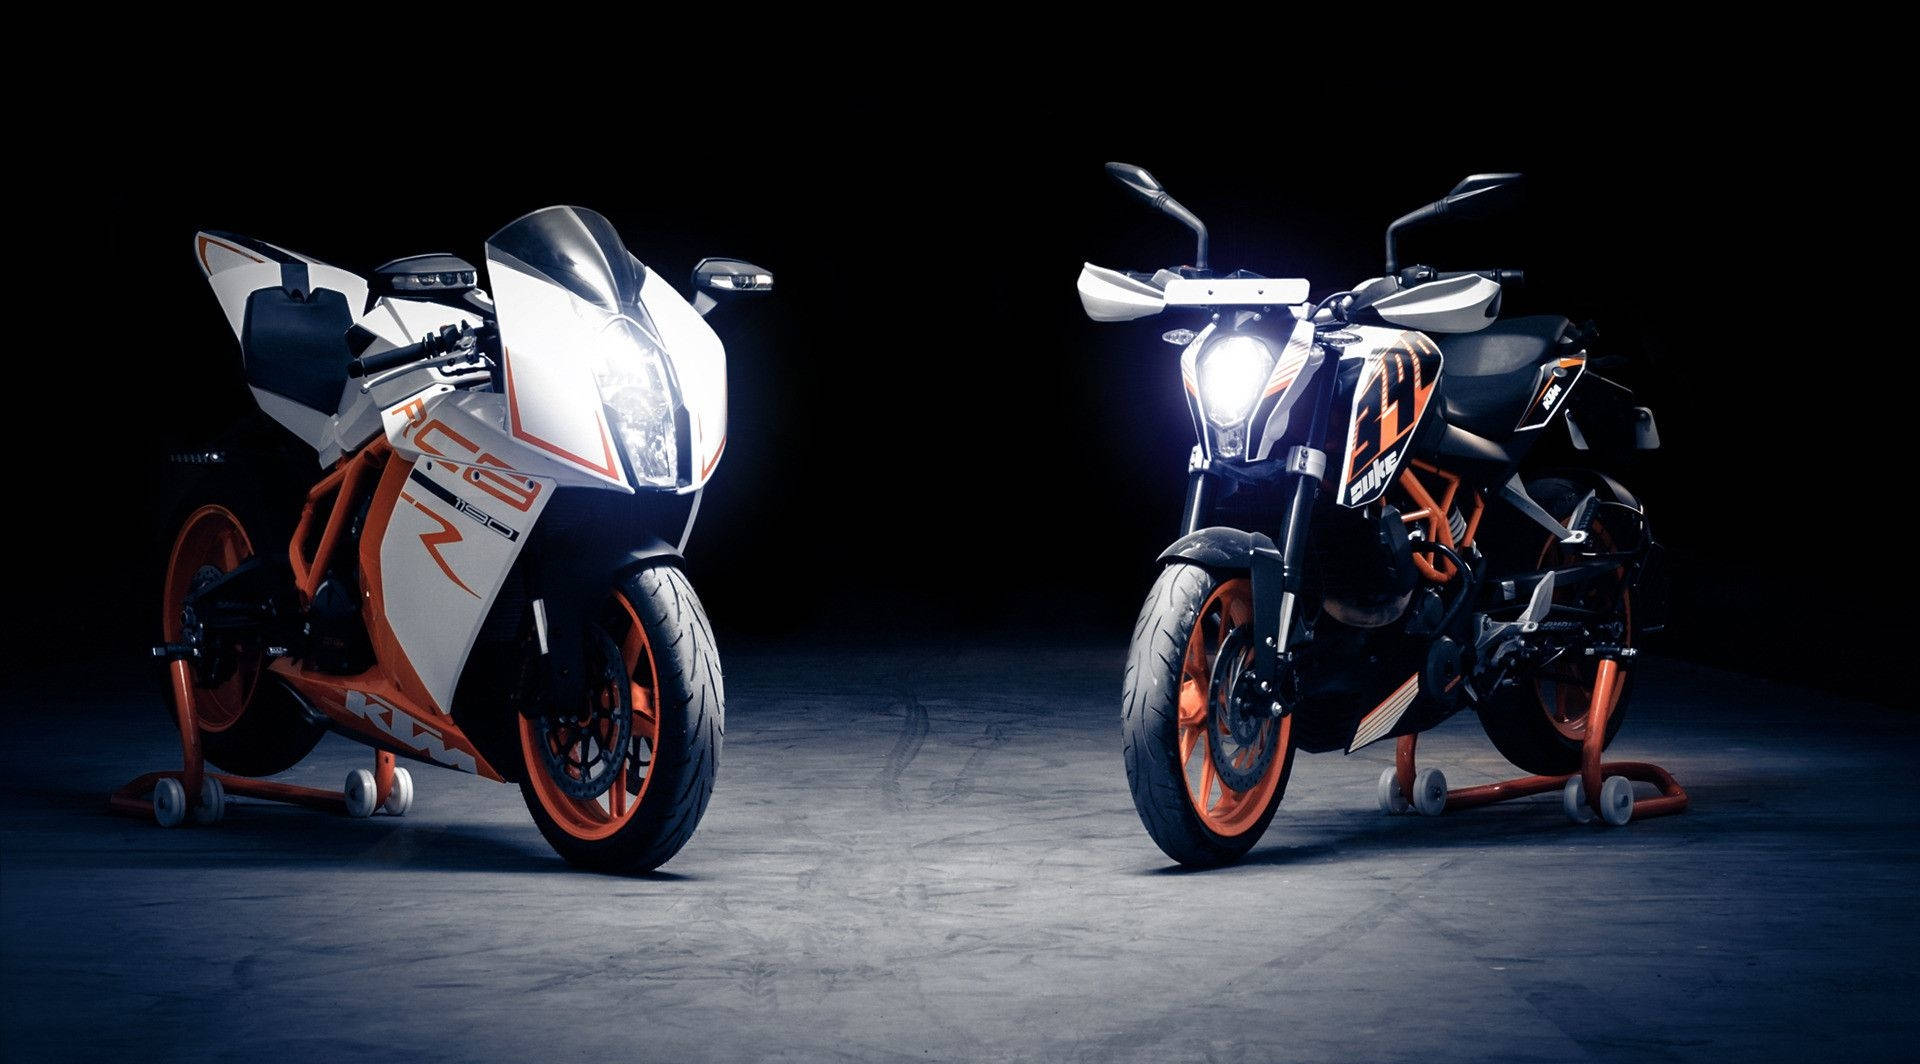 The Dynamic Duo - KTM Duke 390&KTM 1190 RC8 in Raw Action Wallpaper